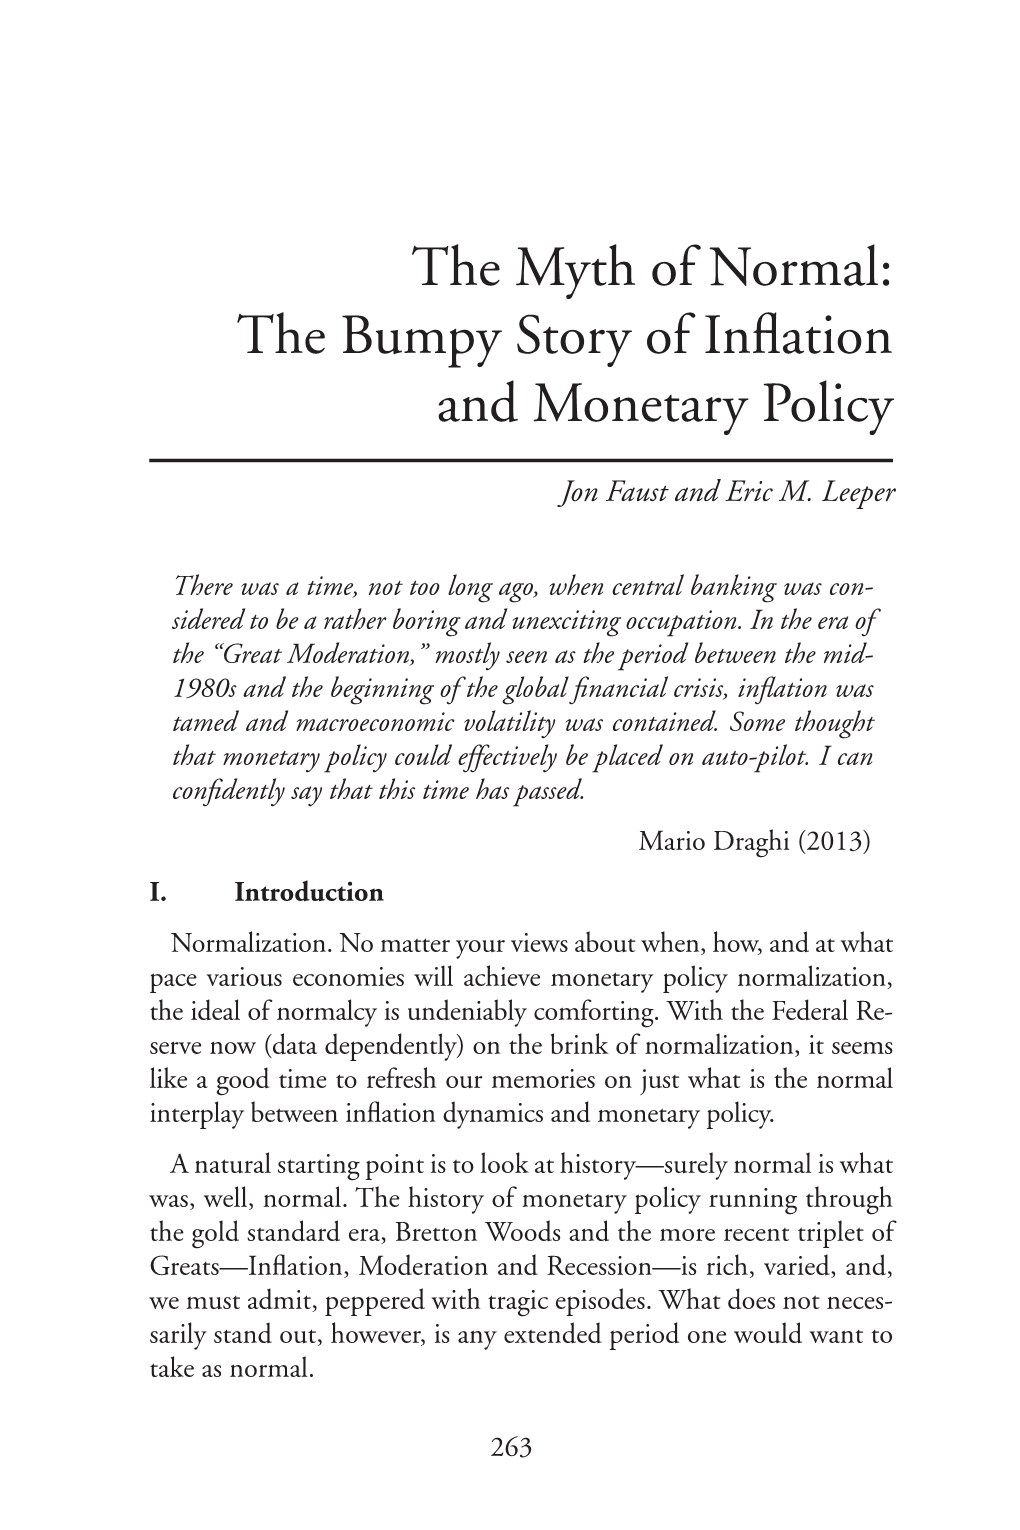 The Myth of Normal: the Bumpy Story of Inflation and Monetary Policy